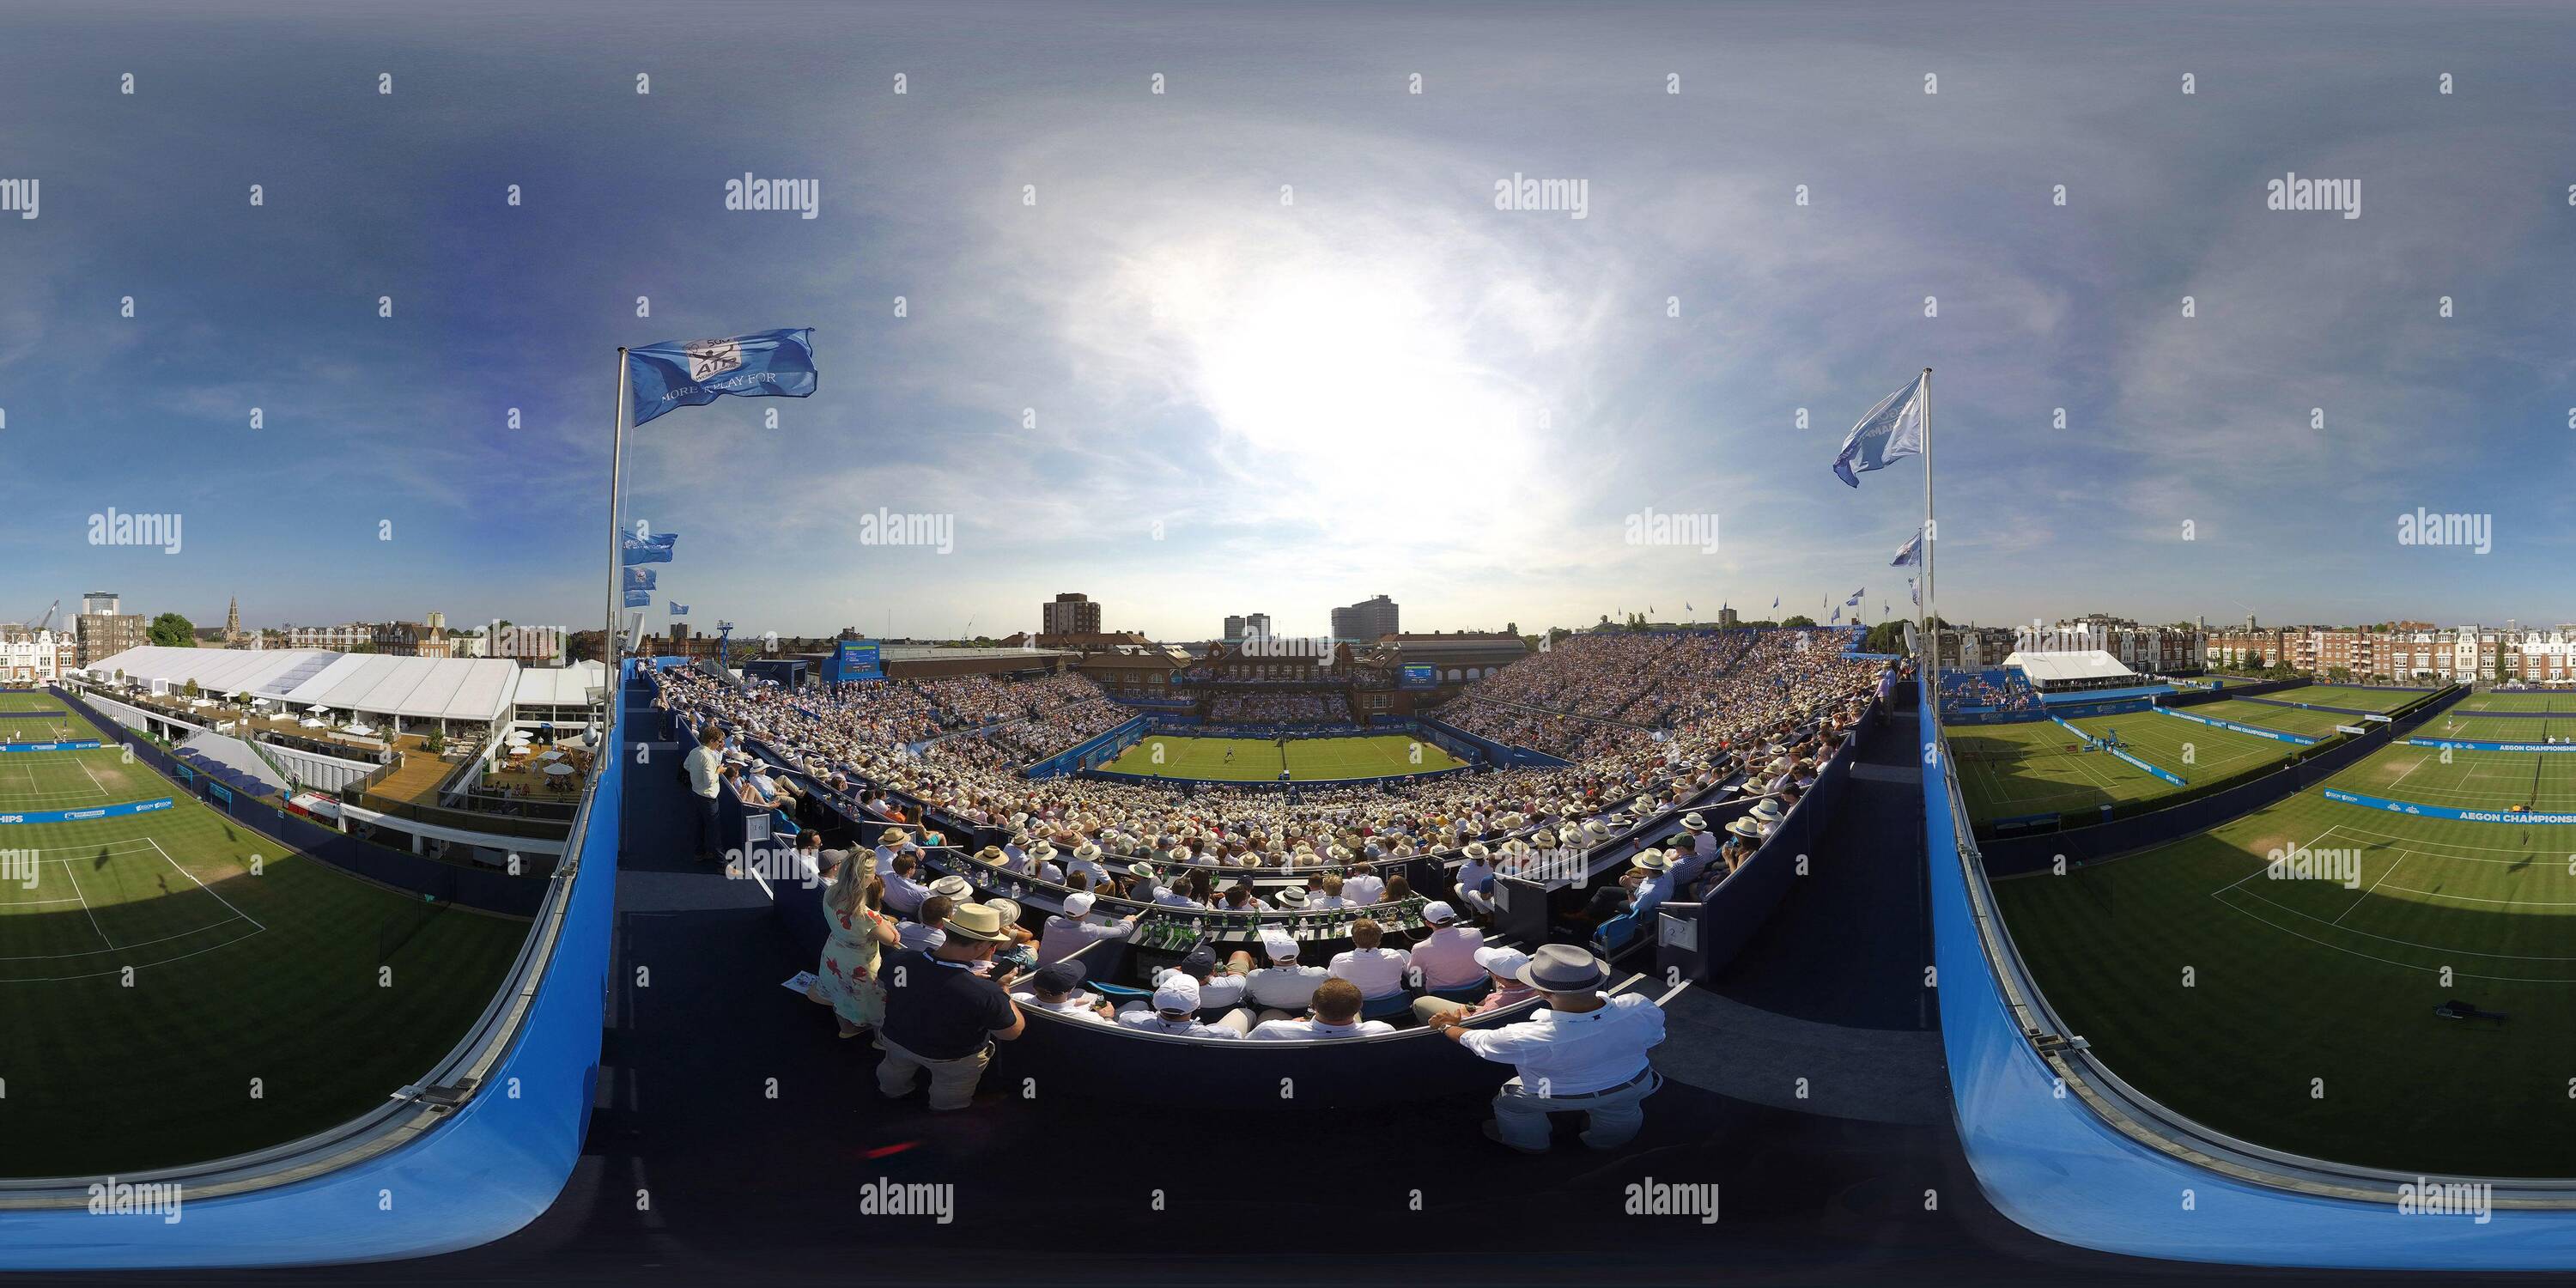 360 degree panoramic view of ANDY MURRAY DURING HIS GAME WITH JORDAN THOMPSON AT THE AEGON TENNIS CHAMPIONSHIPS,QUEENS CLUB, LONDON. PICTURE CREDIT:  © MARK PAIN / ALAMY